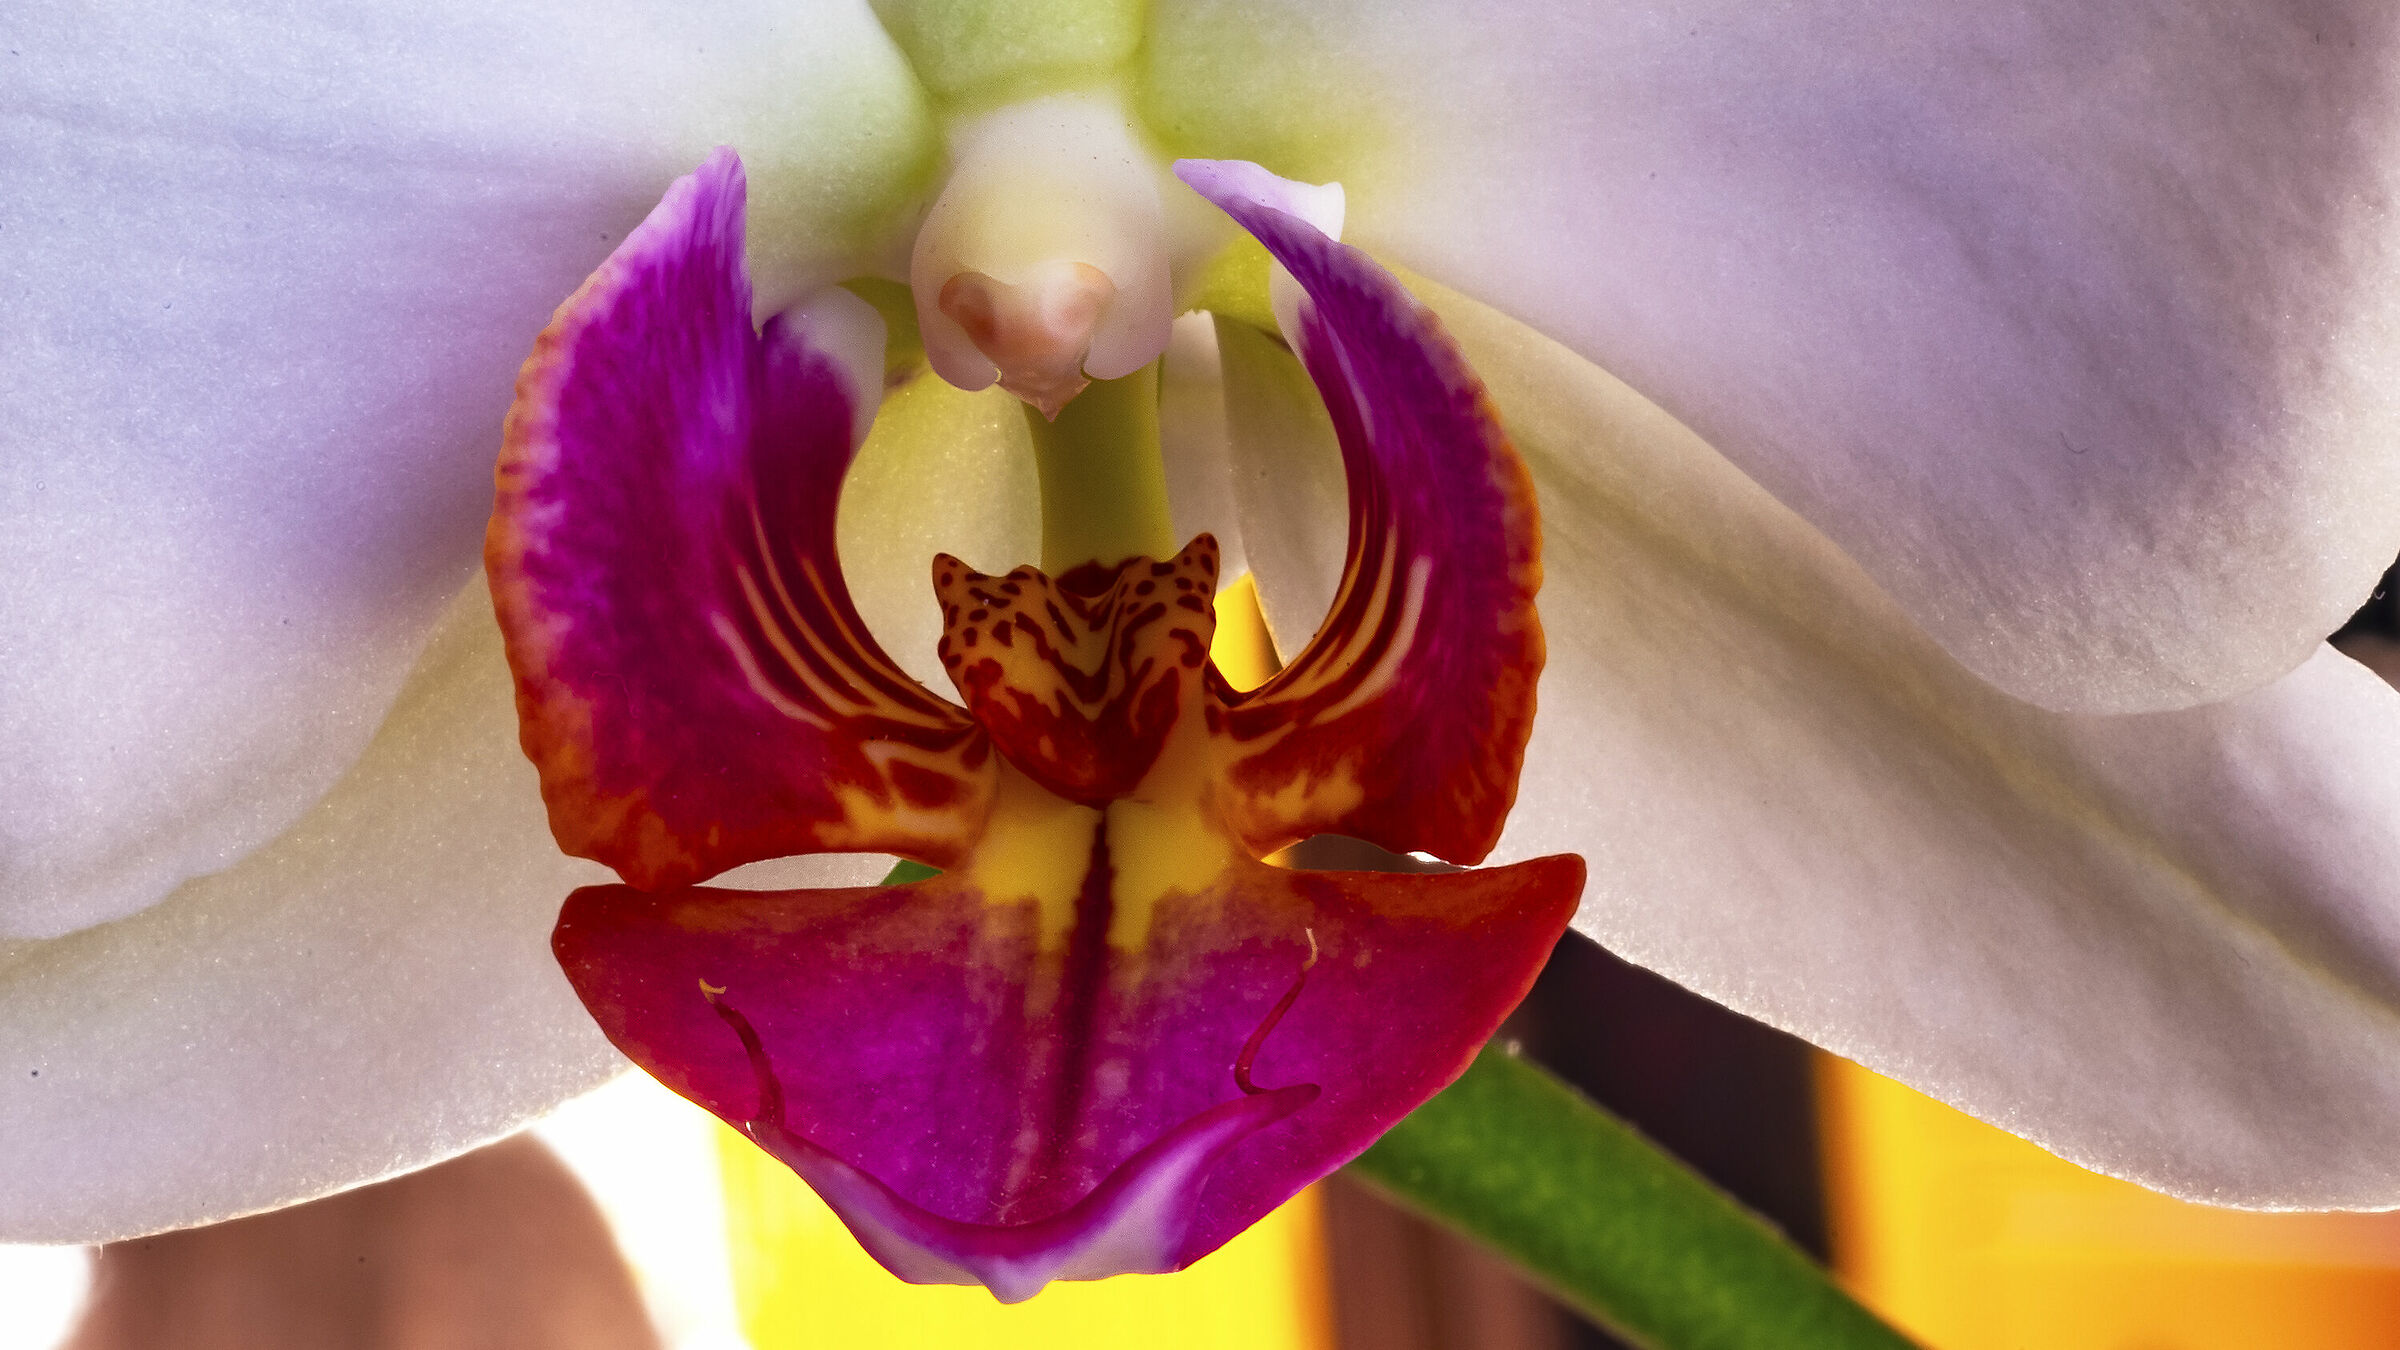 THE Heart of the White Orchid...